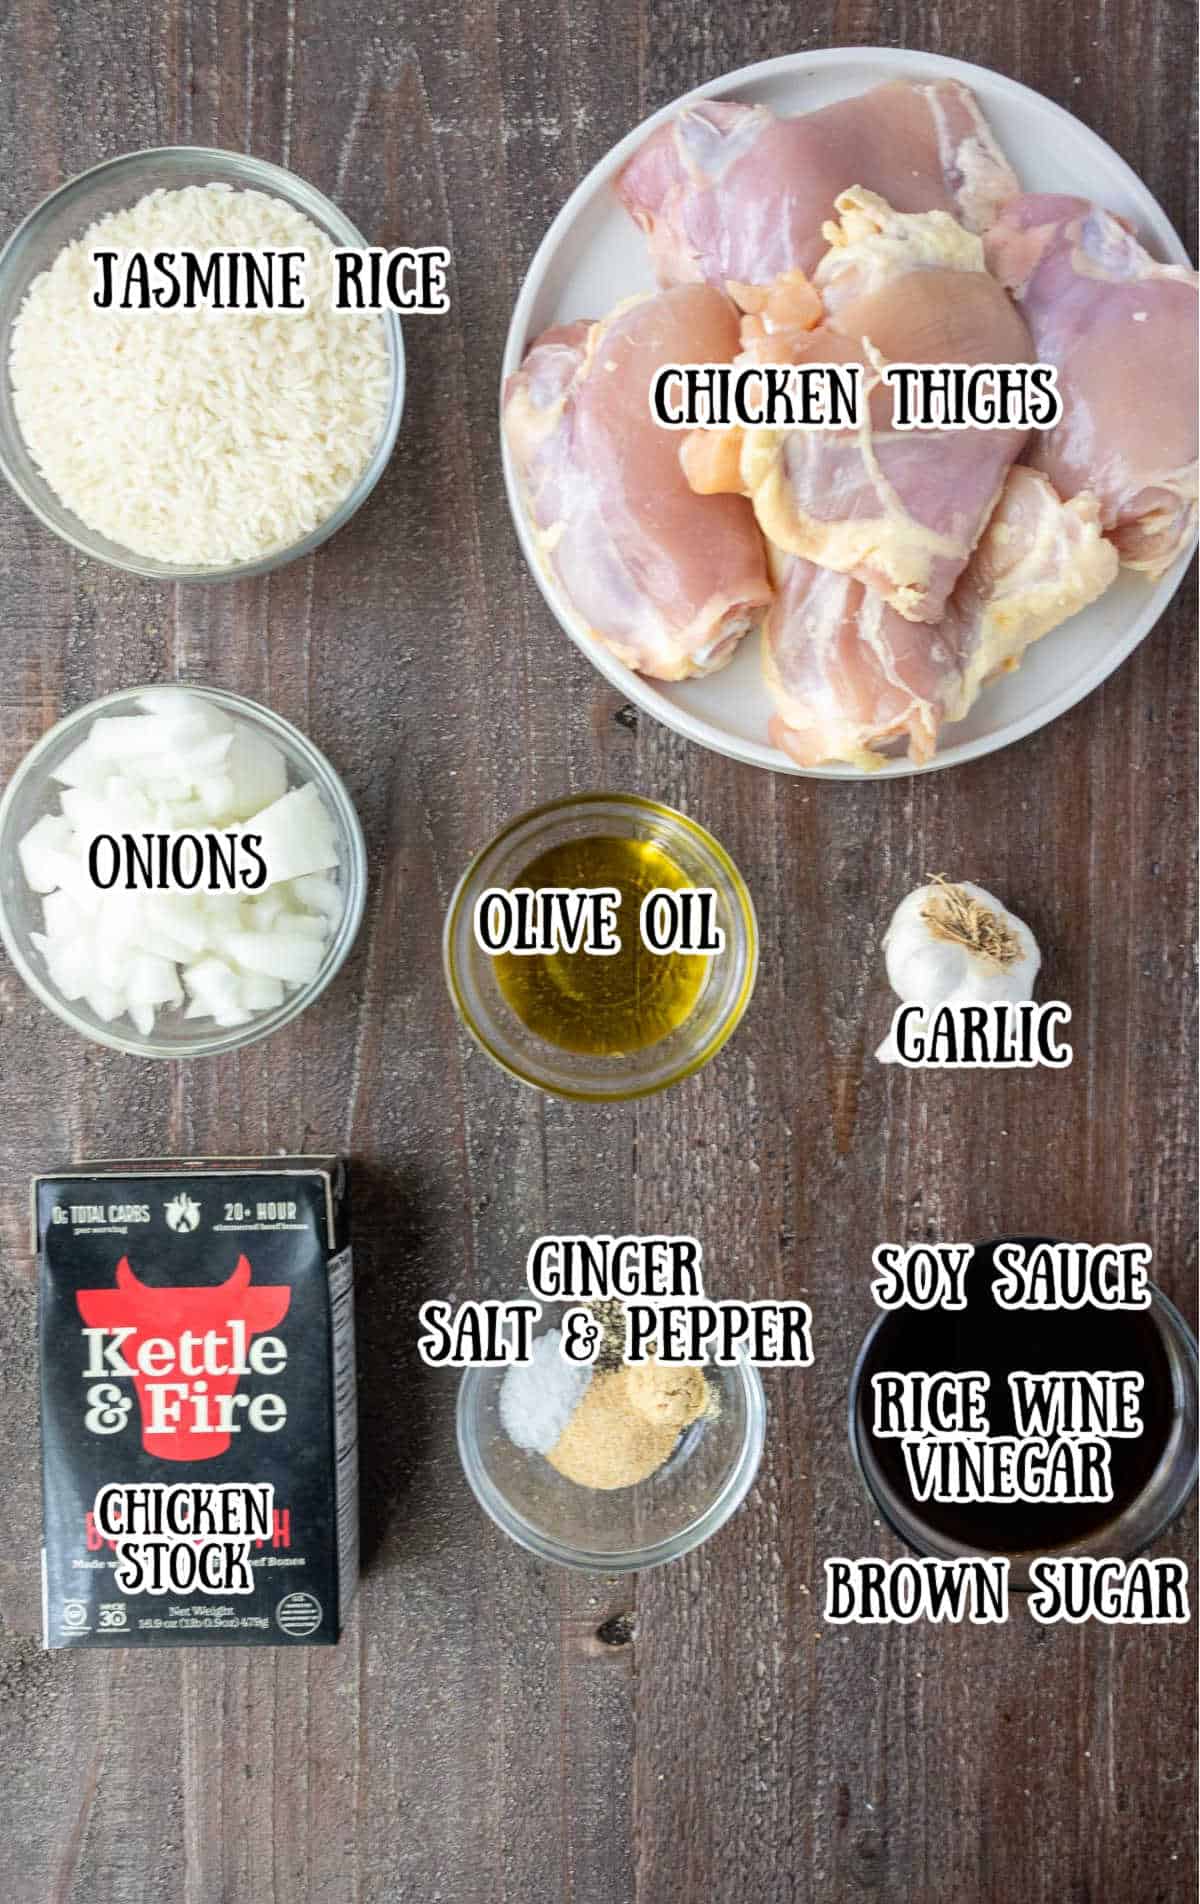 All the ingredients needed for this hibachi chicken.